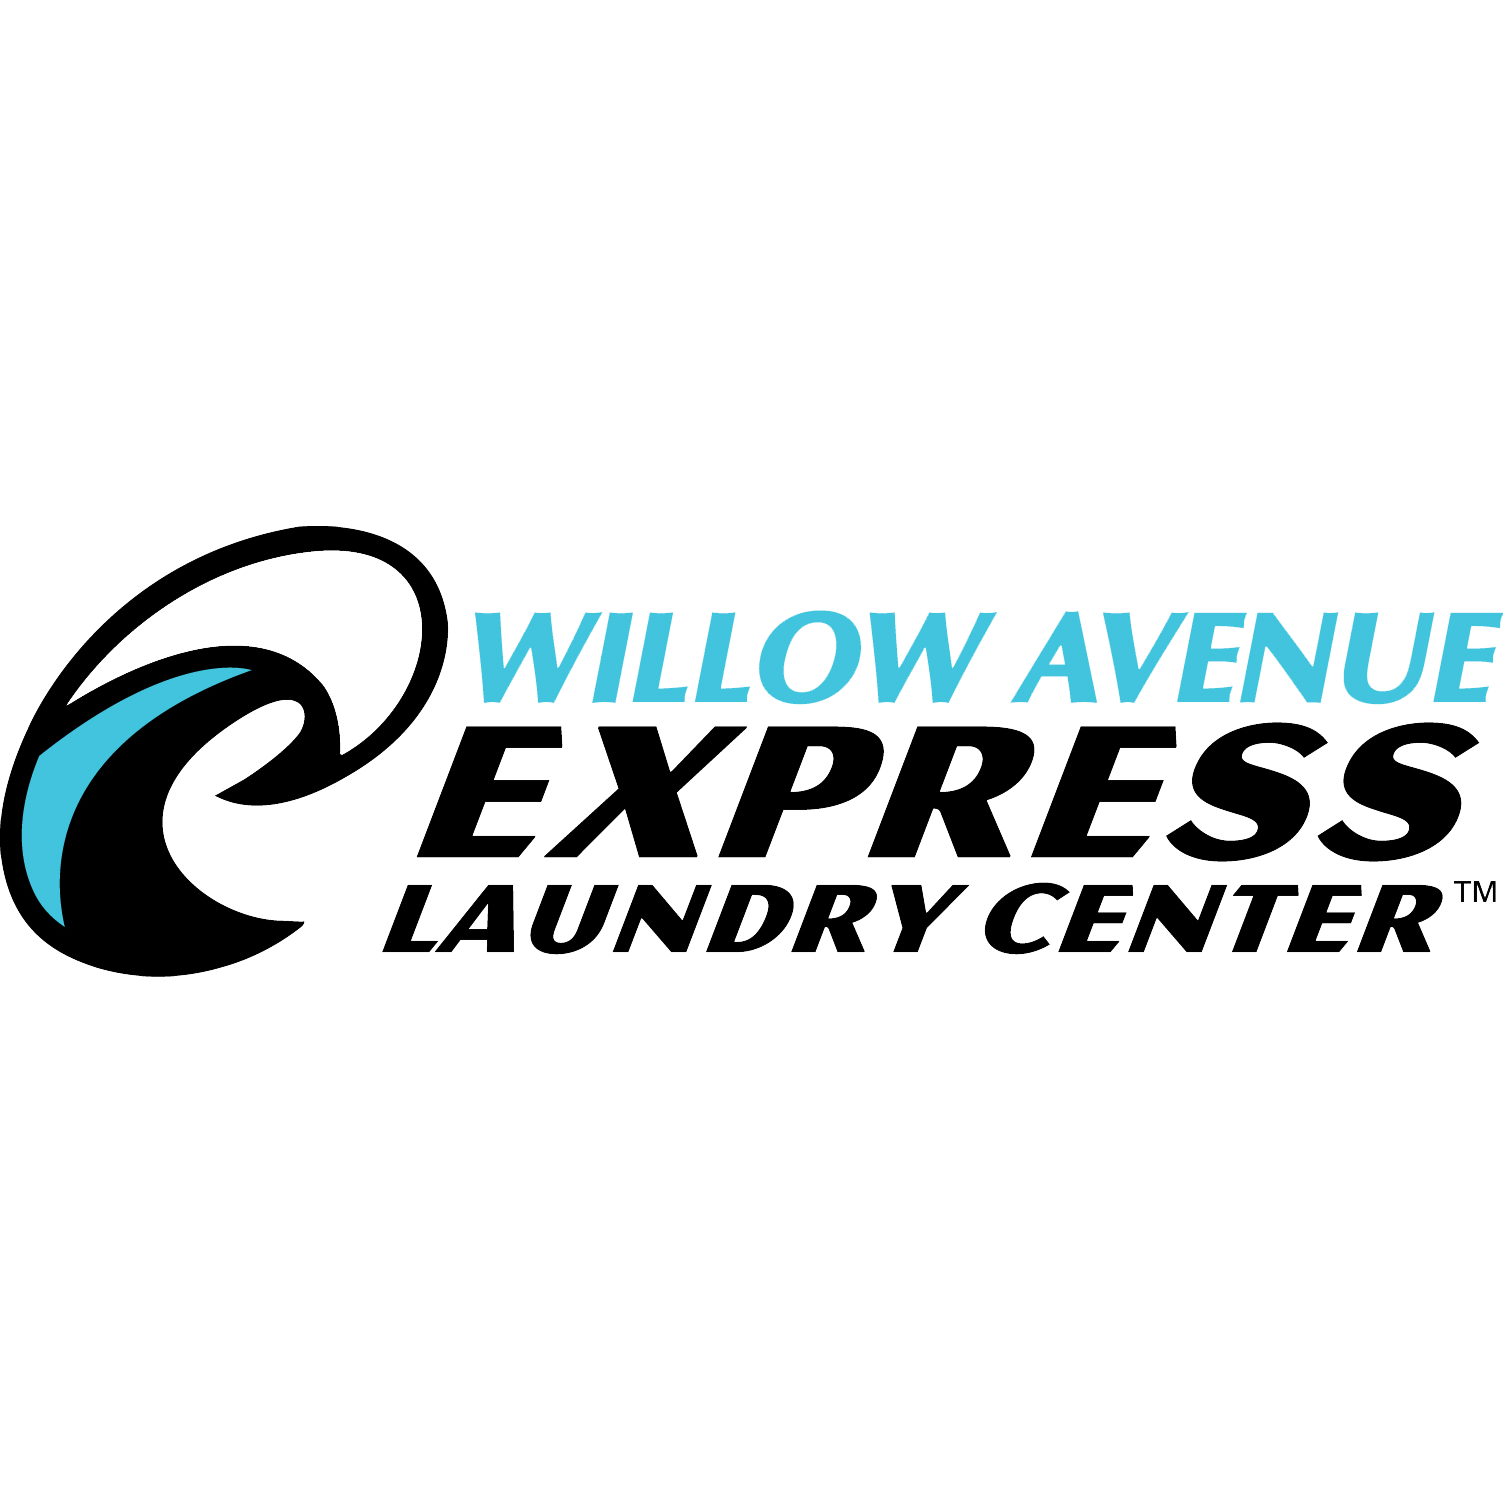 Willow Avenue Express Laundry Center Logo